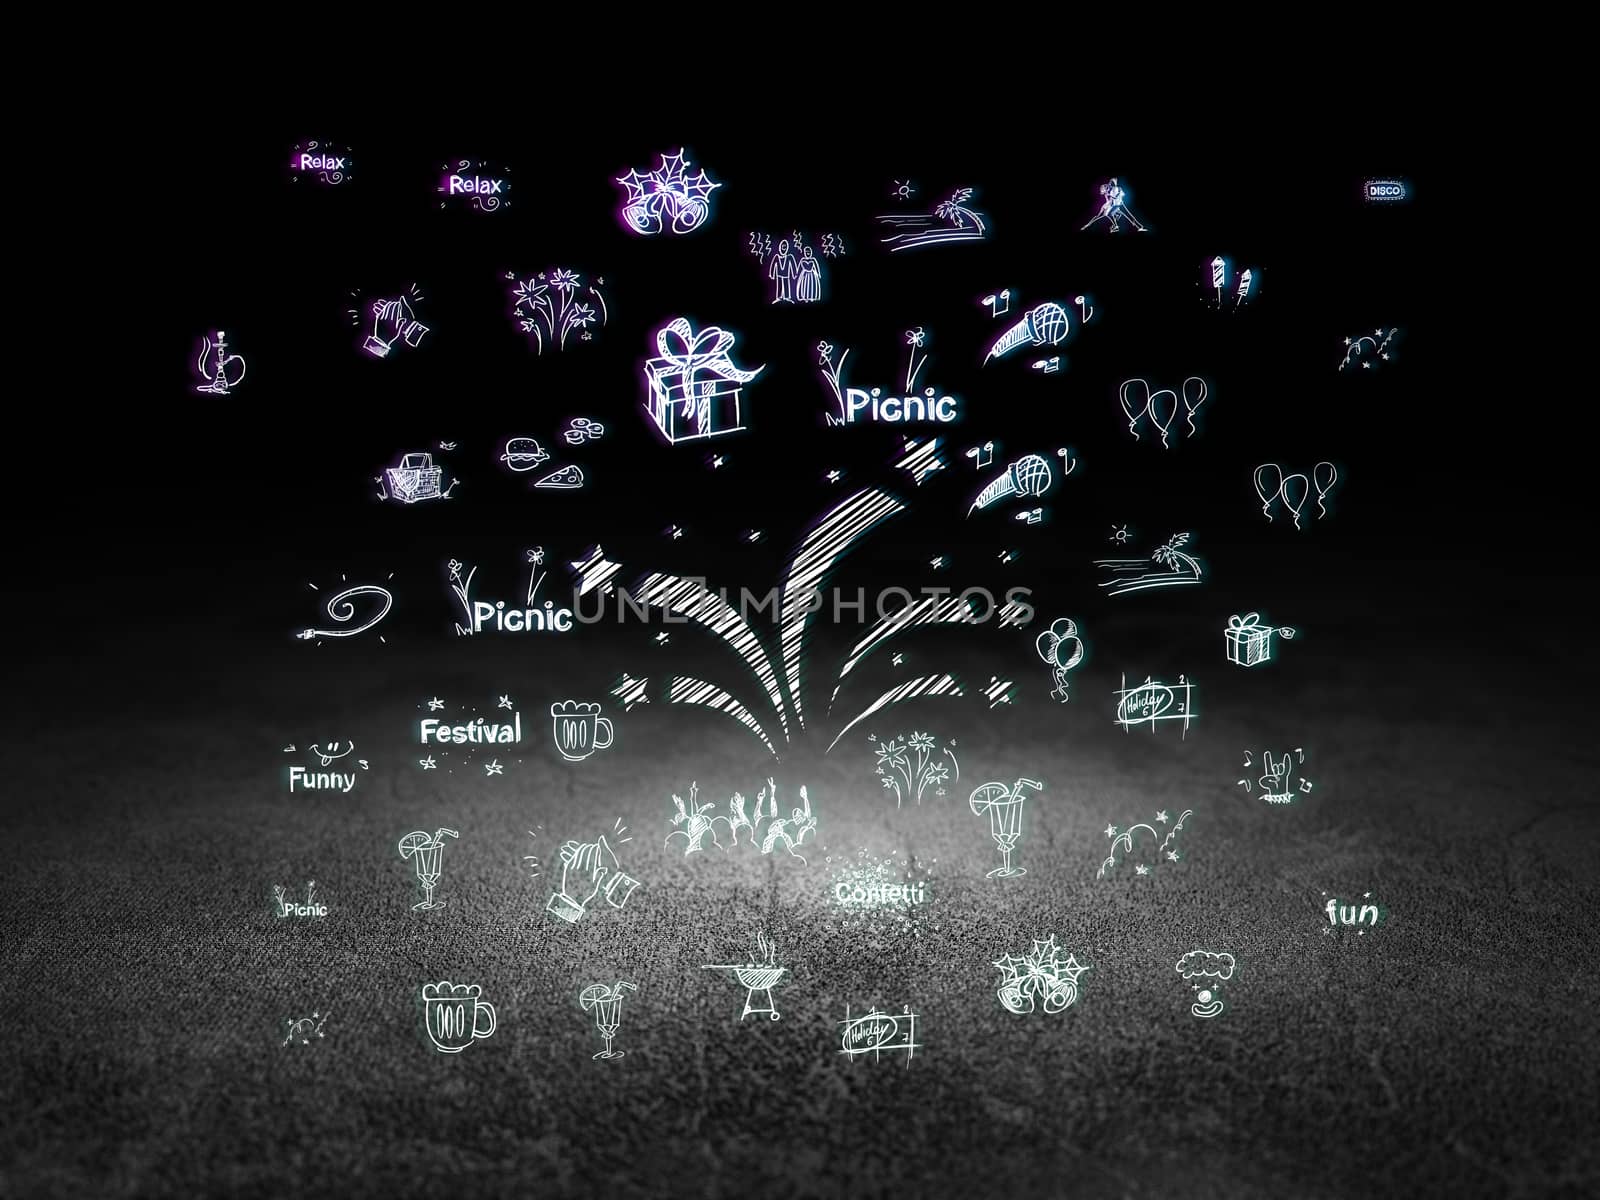 Holiday concept: Glowing Fireworks icon in grunge dark room with Dirty Floor, black background with  Hand Drawn Holiday Icons